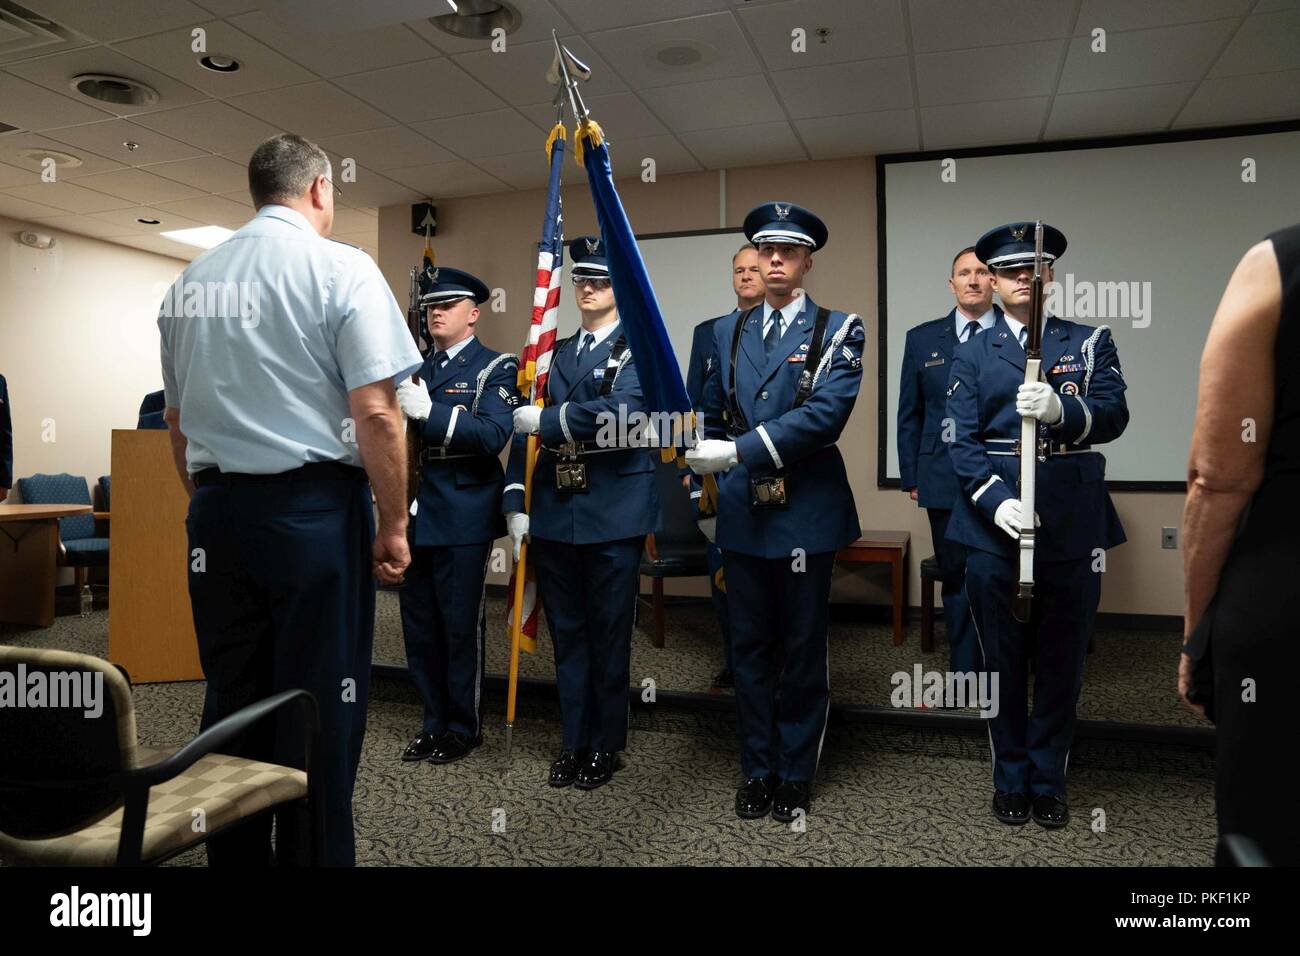 Honor guard members hold position at present arms during the 315th Aeromedical Evacuation Squadron assumption of command ceremony Aug. 5, 2018, at the Yonkie Auditorium at Joint Base Charleston, S.C. Lt. Col. David Bailey assumed command of the squadron after his tenure as interim commander. Stock Photo